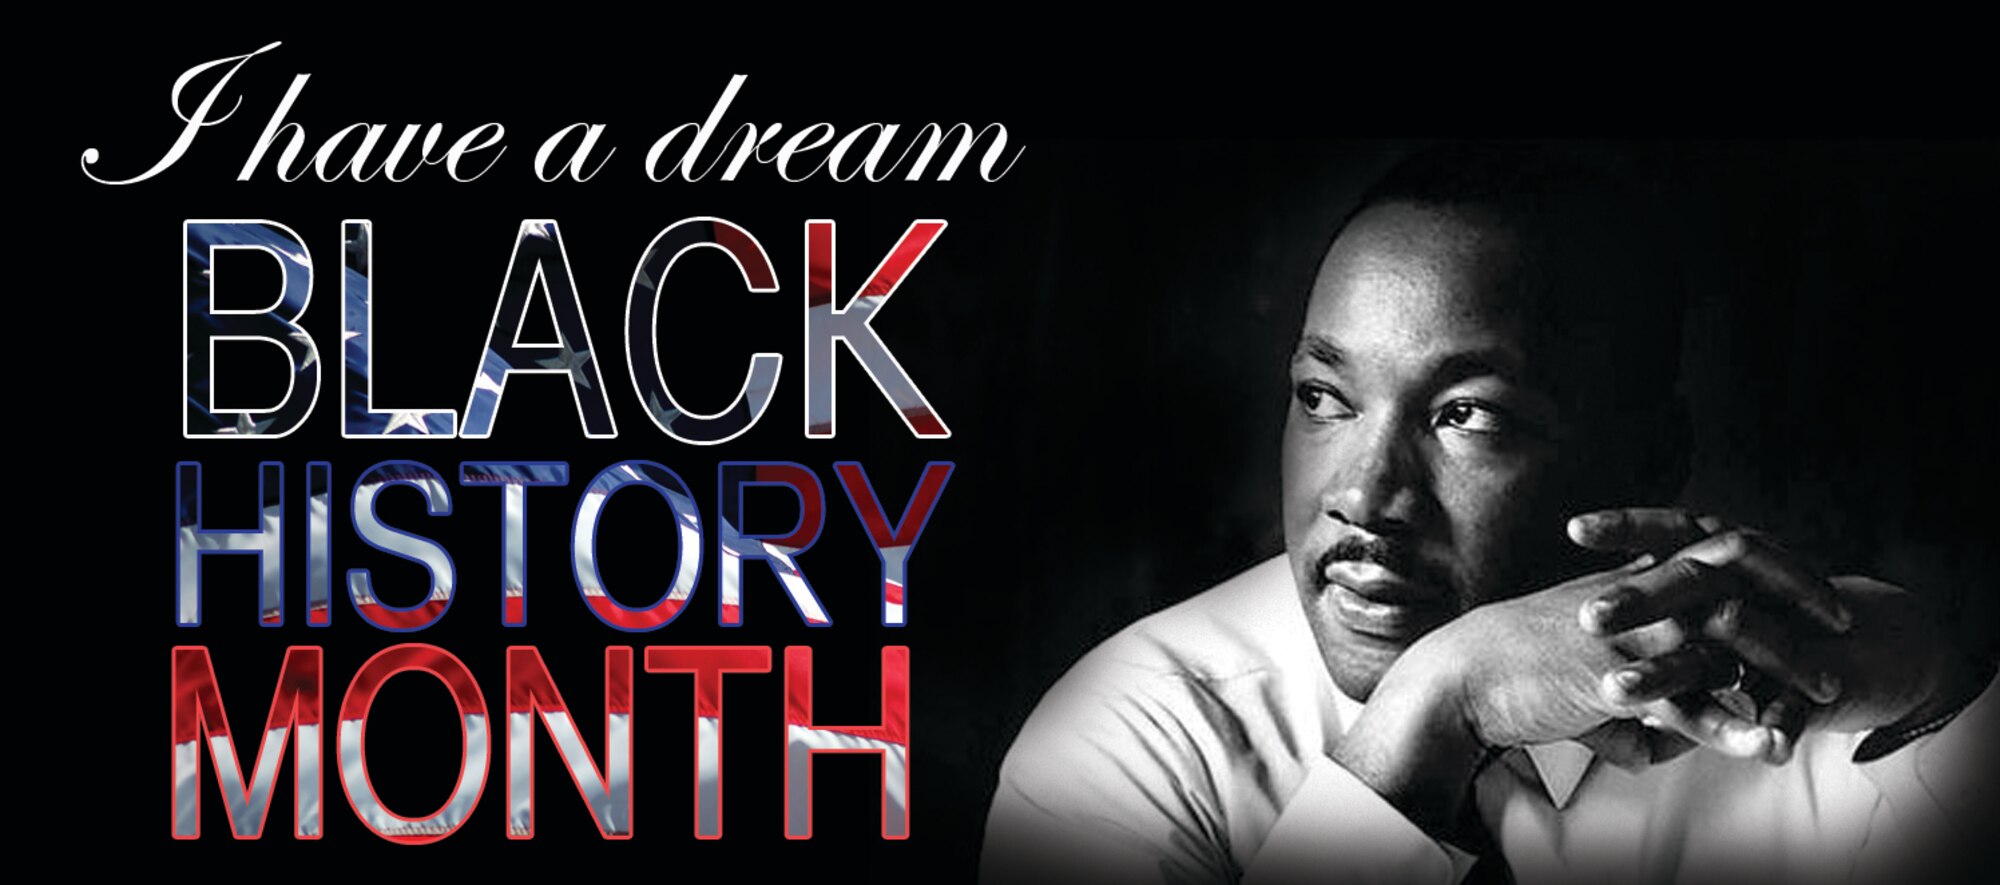 February is Black History Month. Black history has been recognized annually in America since 1926, when historian Dr. Carter G. Woodson designated the second week in February at “Negro History Week.” (U.S. Air Force graphic by Senior Airman Kristen Sauls)